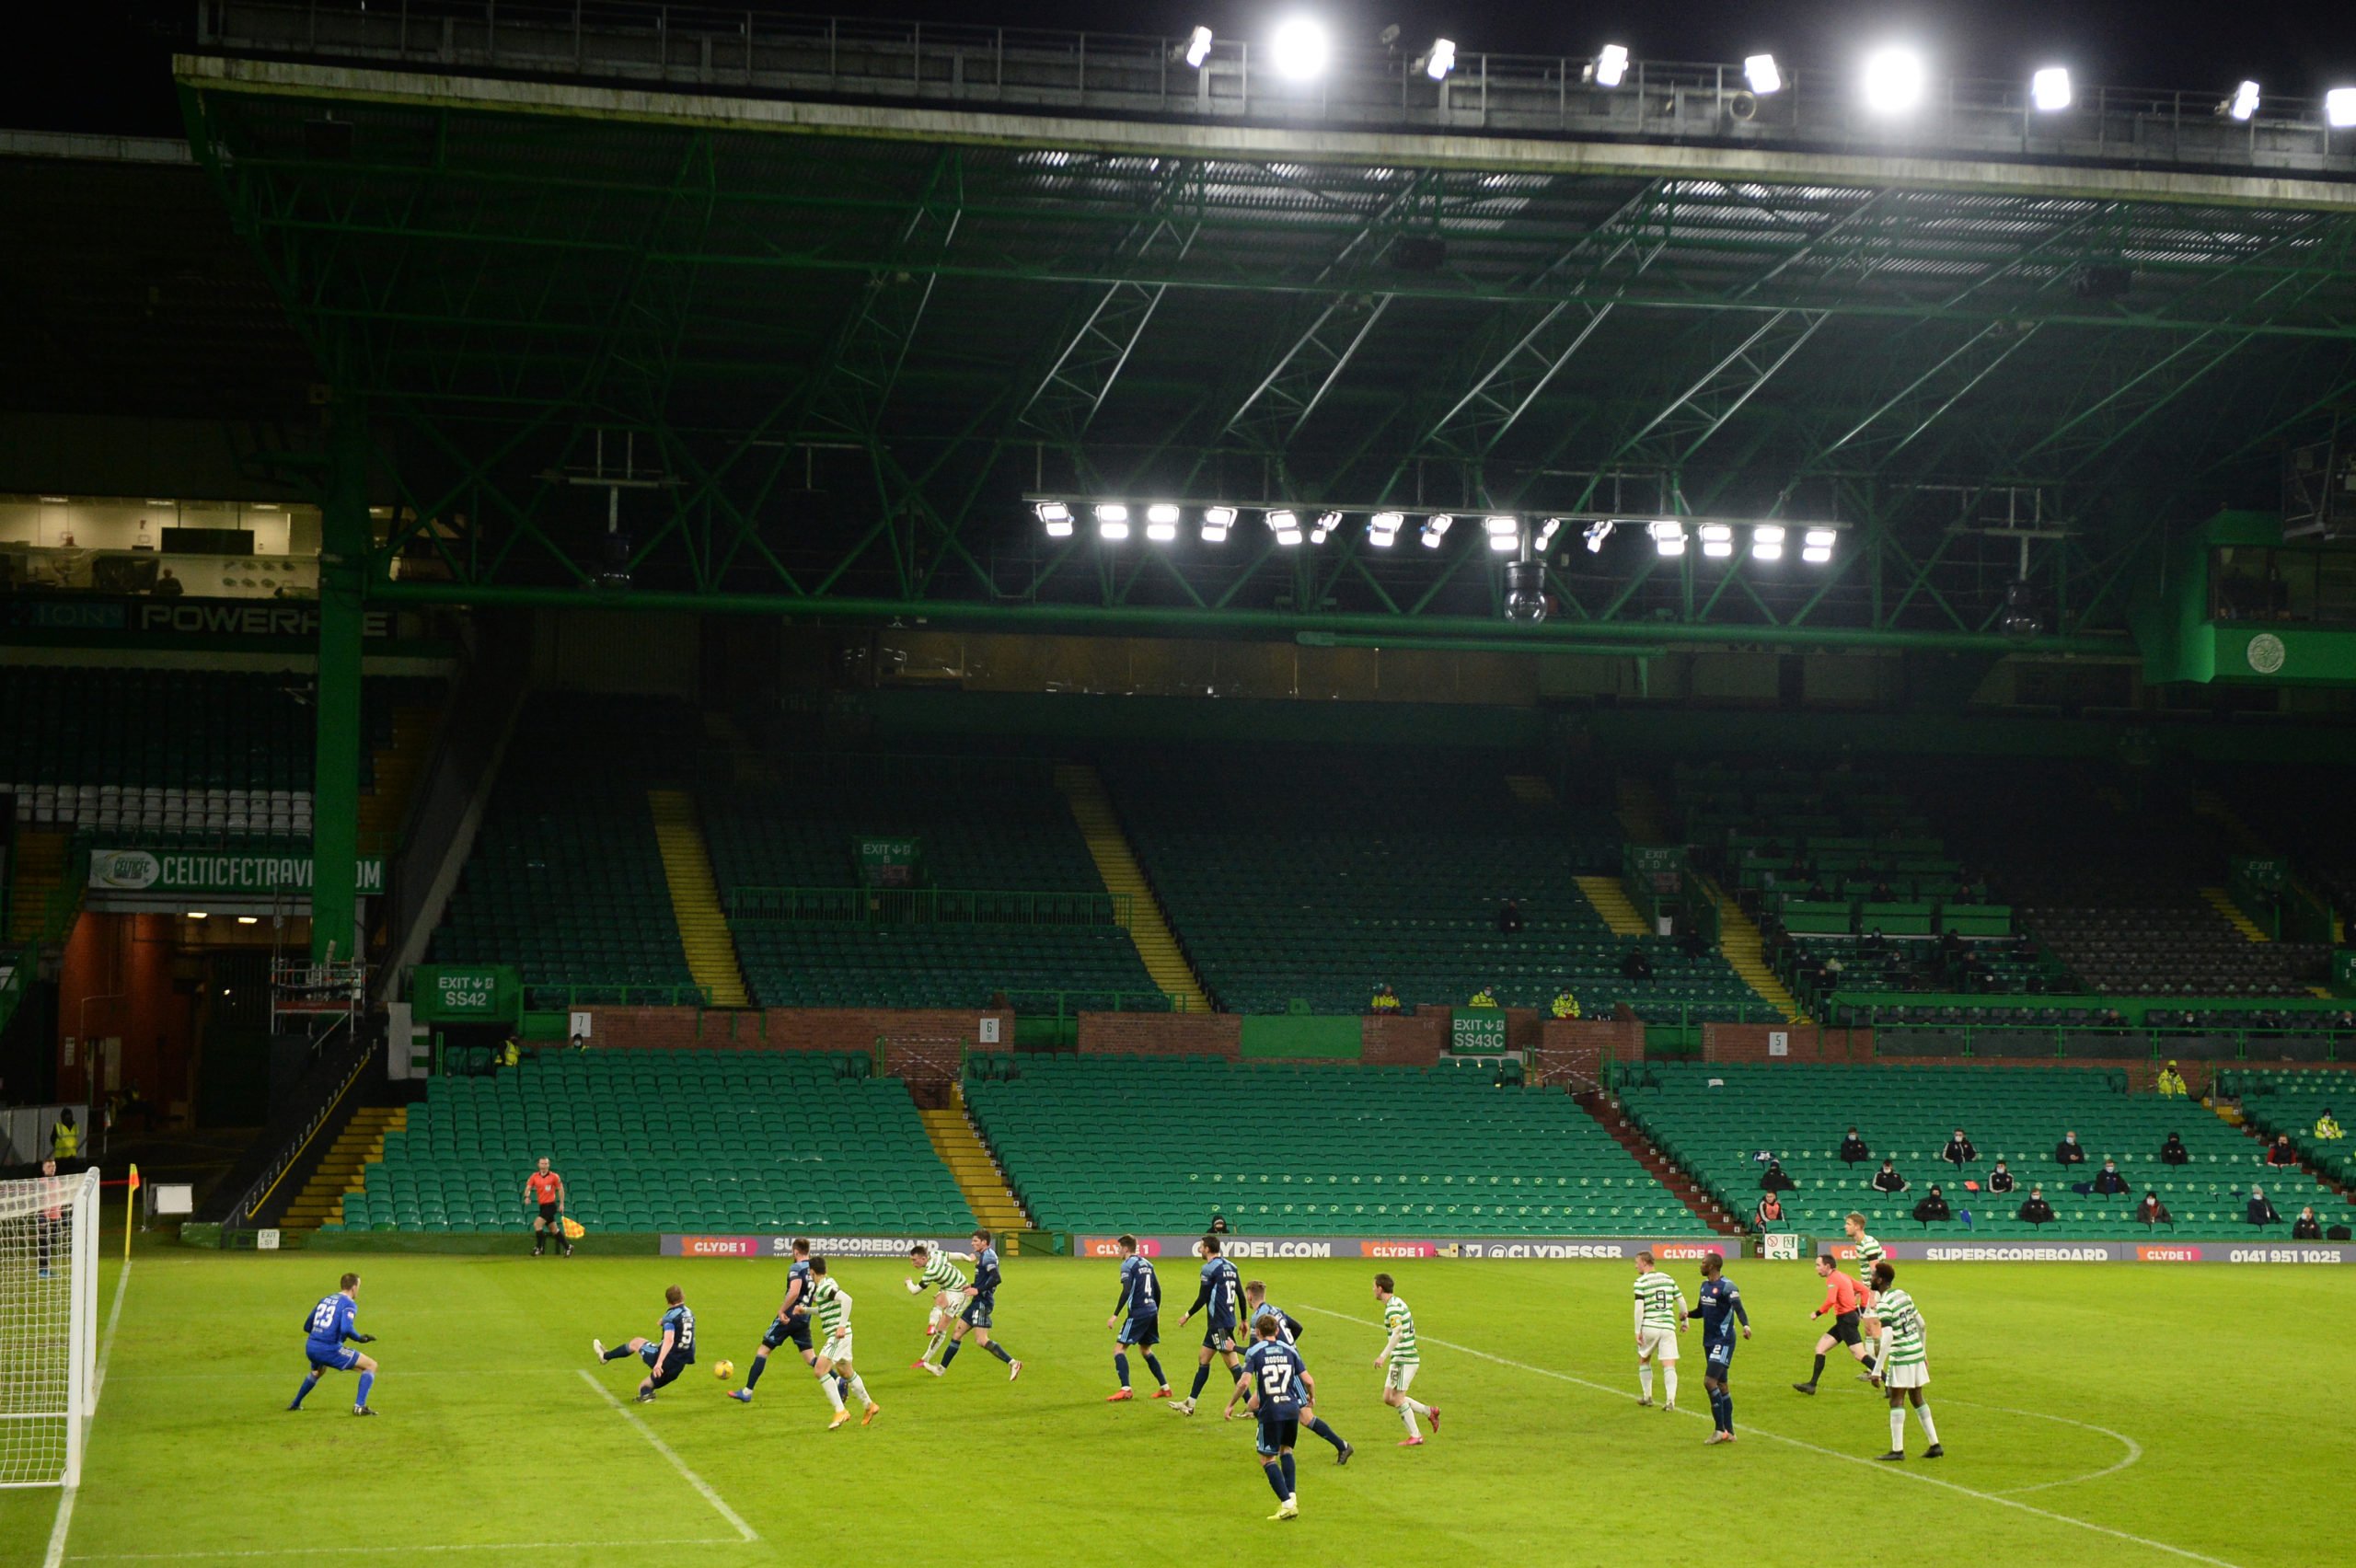 Celtic seeking to refortify former fortress; form over two seasons compared